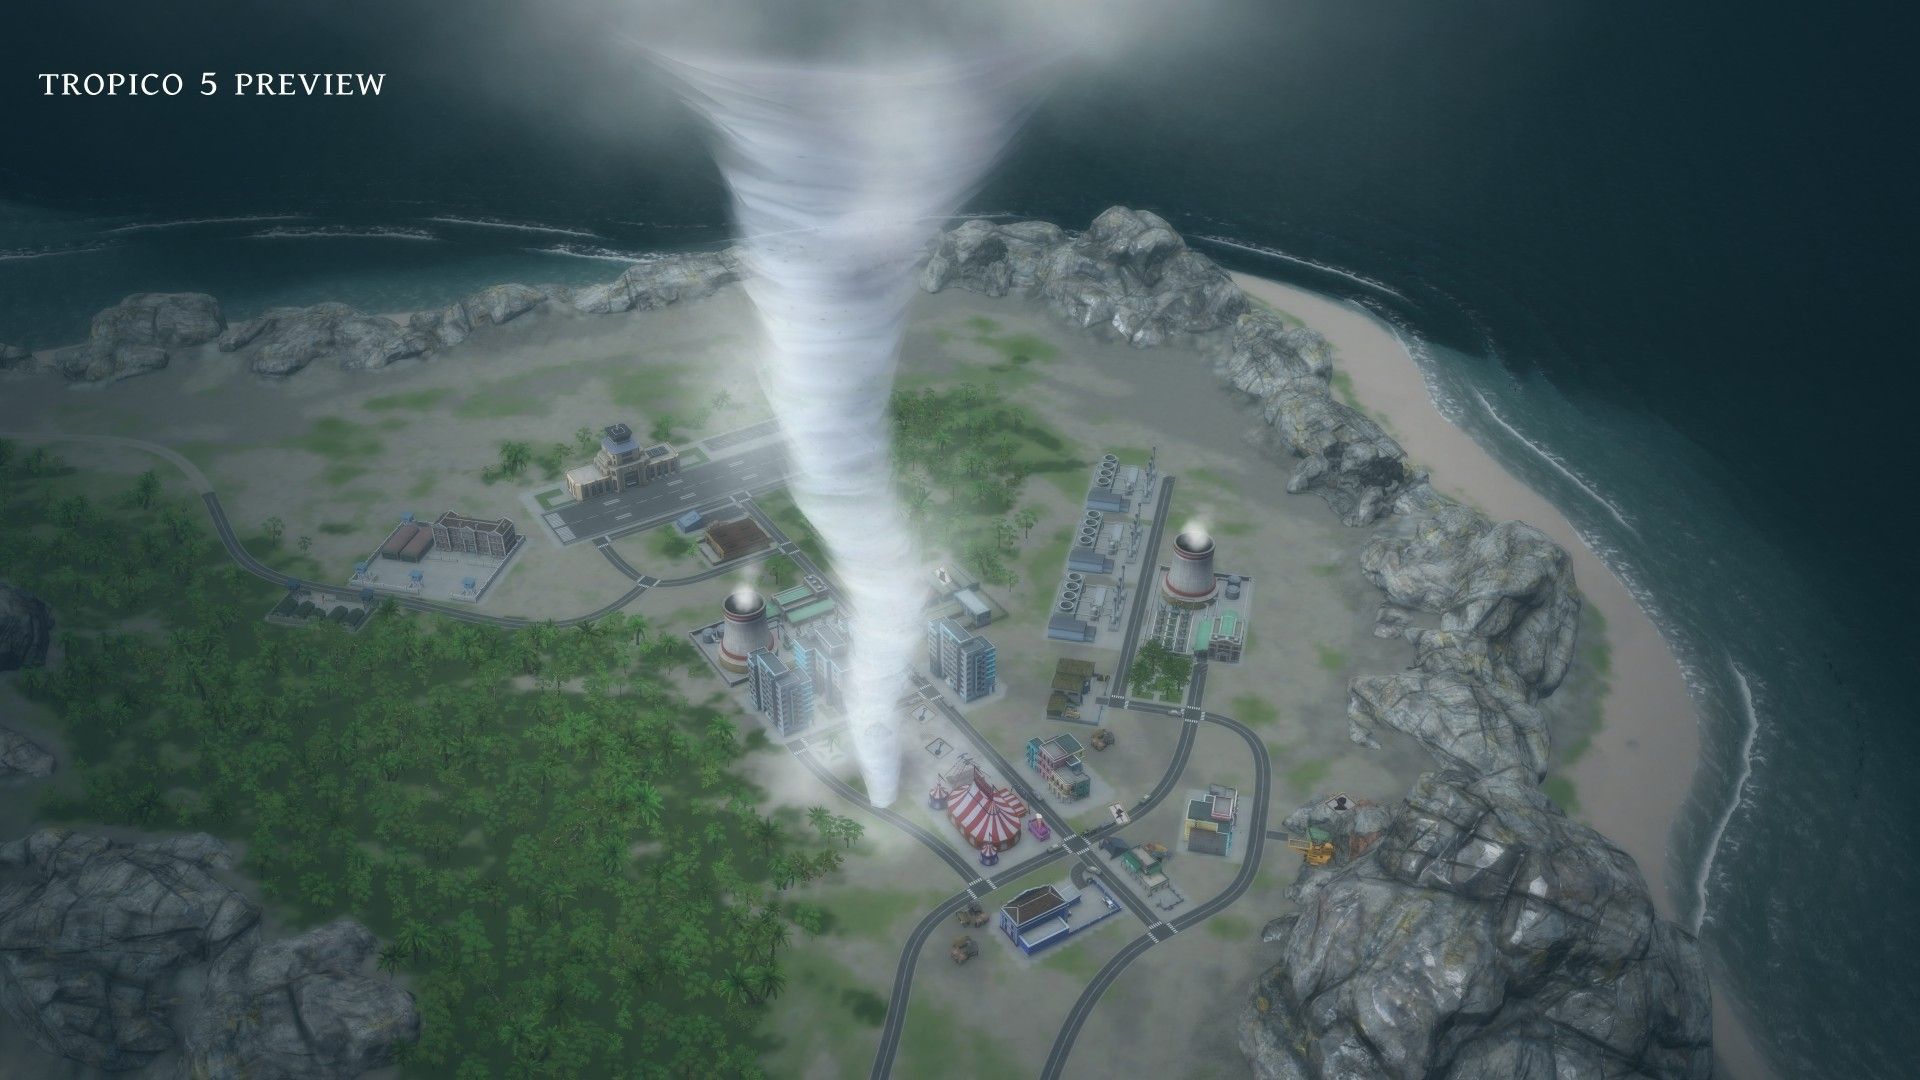 Tornadoes in the game Tropico 5 wallpapers and images - wallpapers